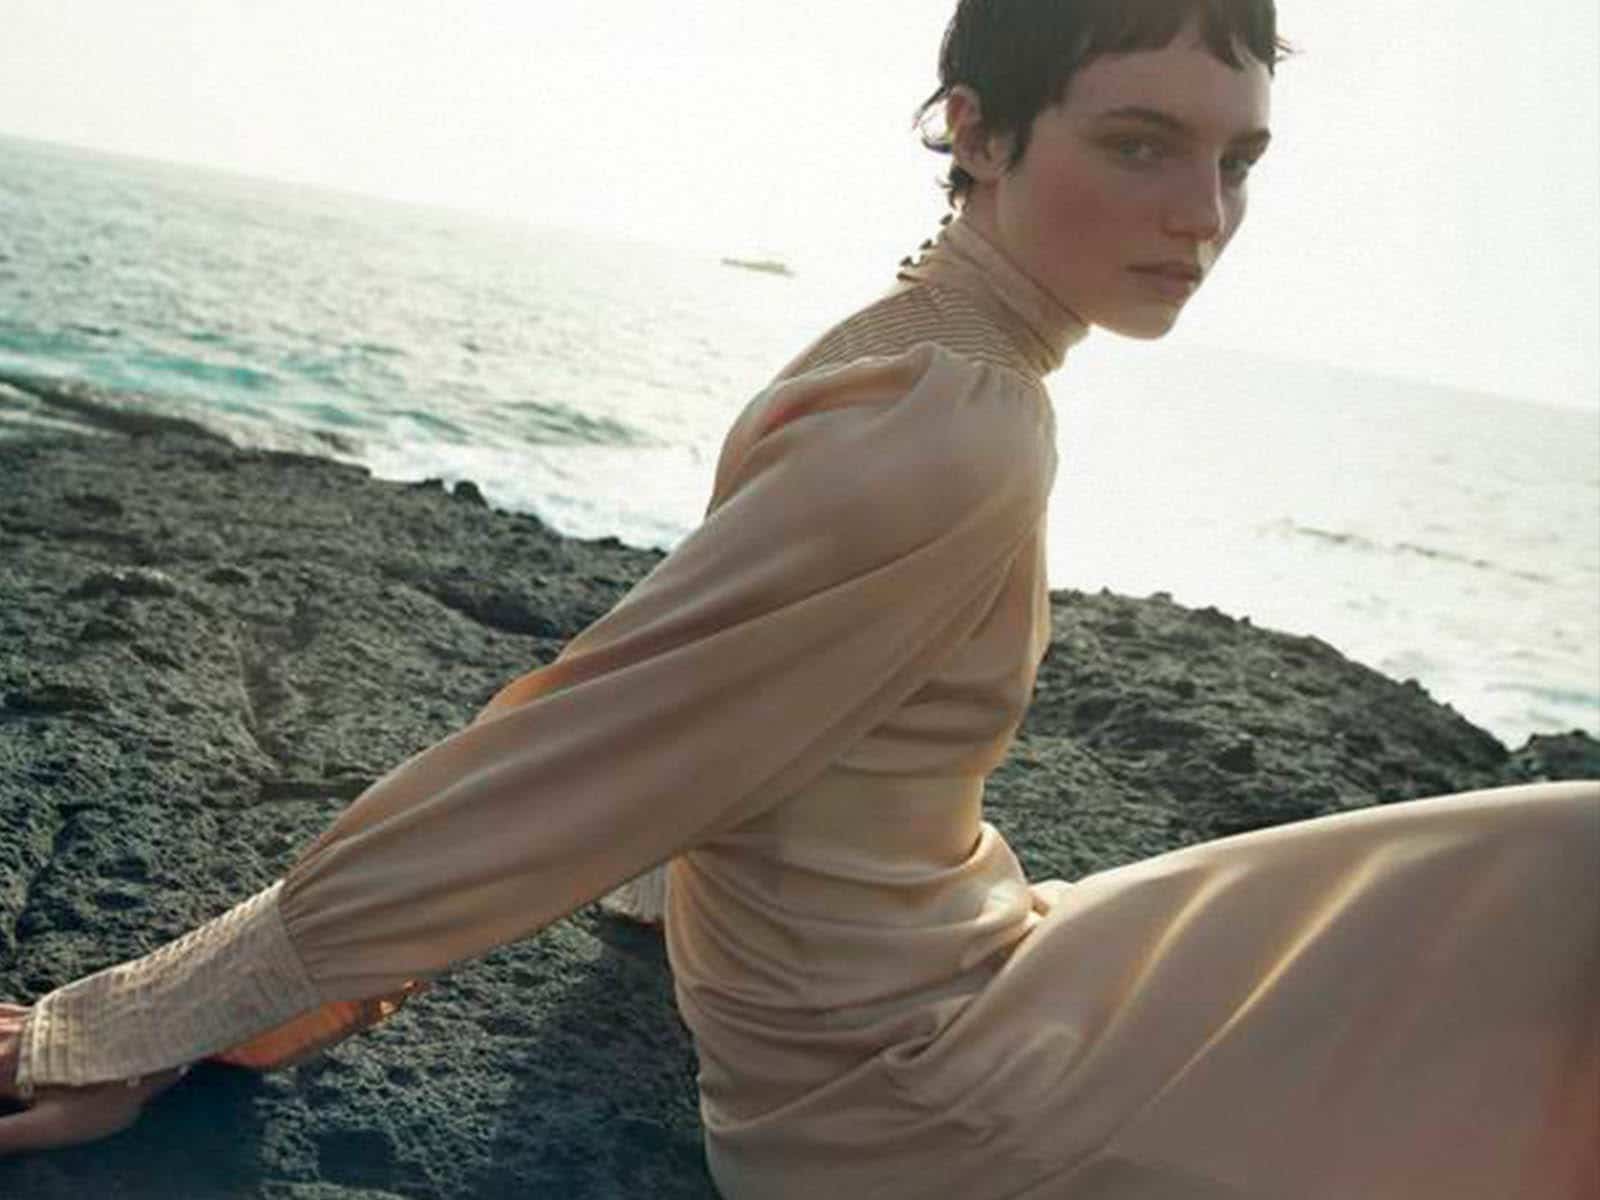 Zara launches 1920s-inspired bridal collection